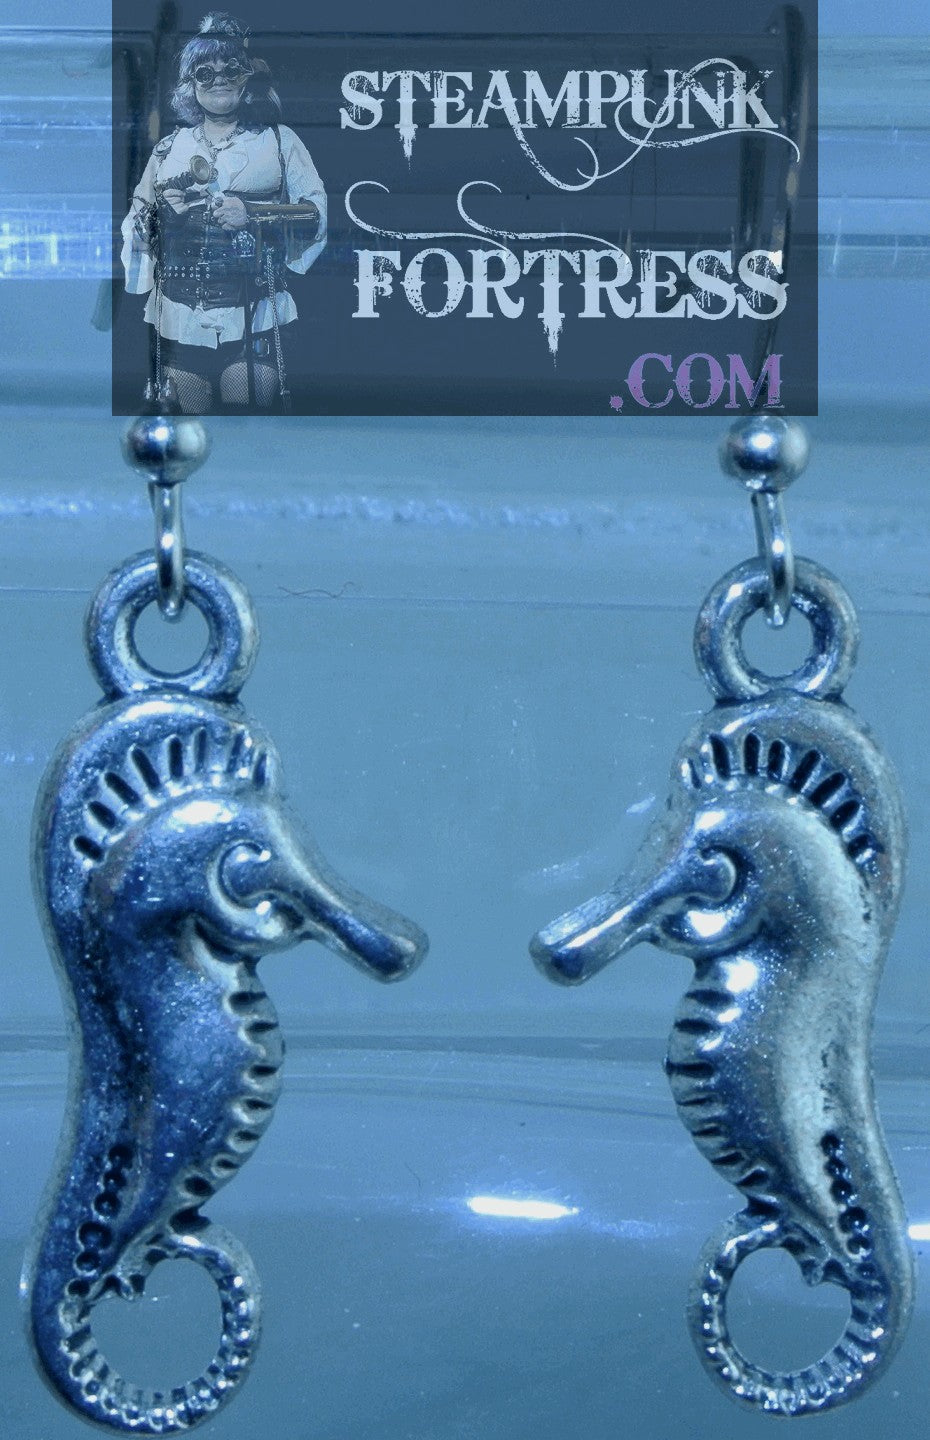 SILVER SEAHORSE PIERCED EARRINGS ARIEL AQUAMAN MAGICIANS FILLORY UNDER THE SEA COSPLAY COSTUME HALLOWEEN STARR WILDE STEAMPUNK FORTRESS DUPLICATE